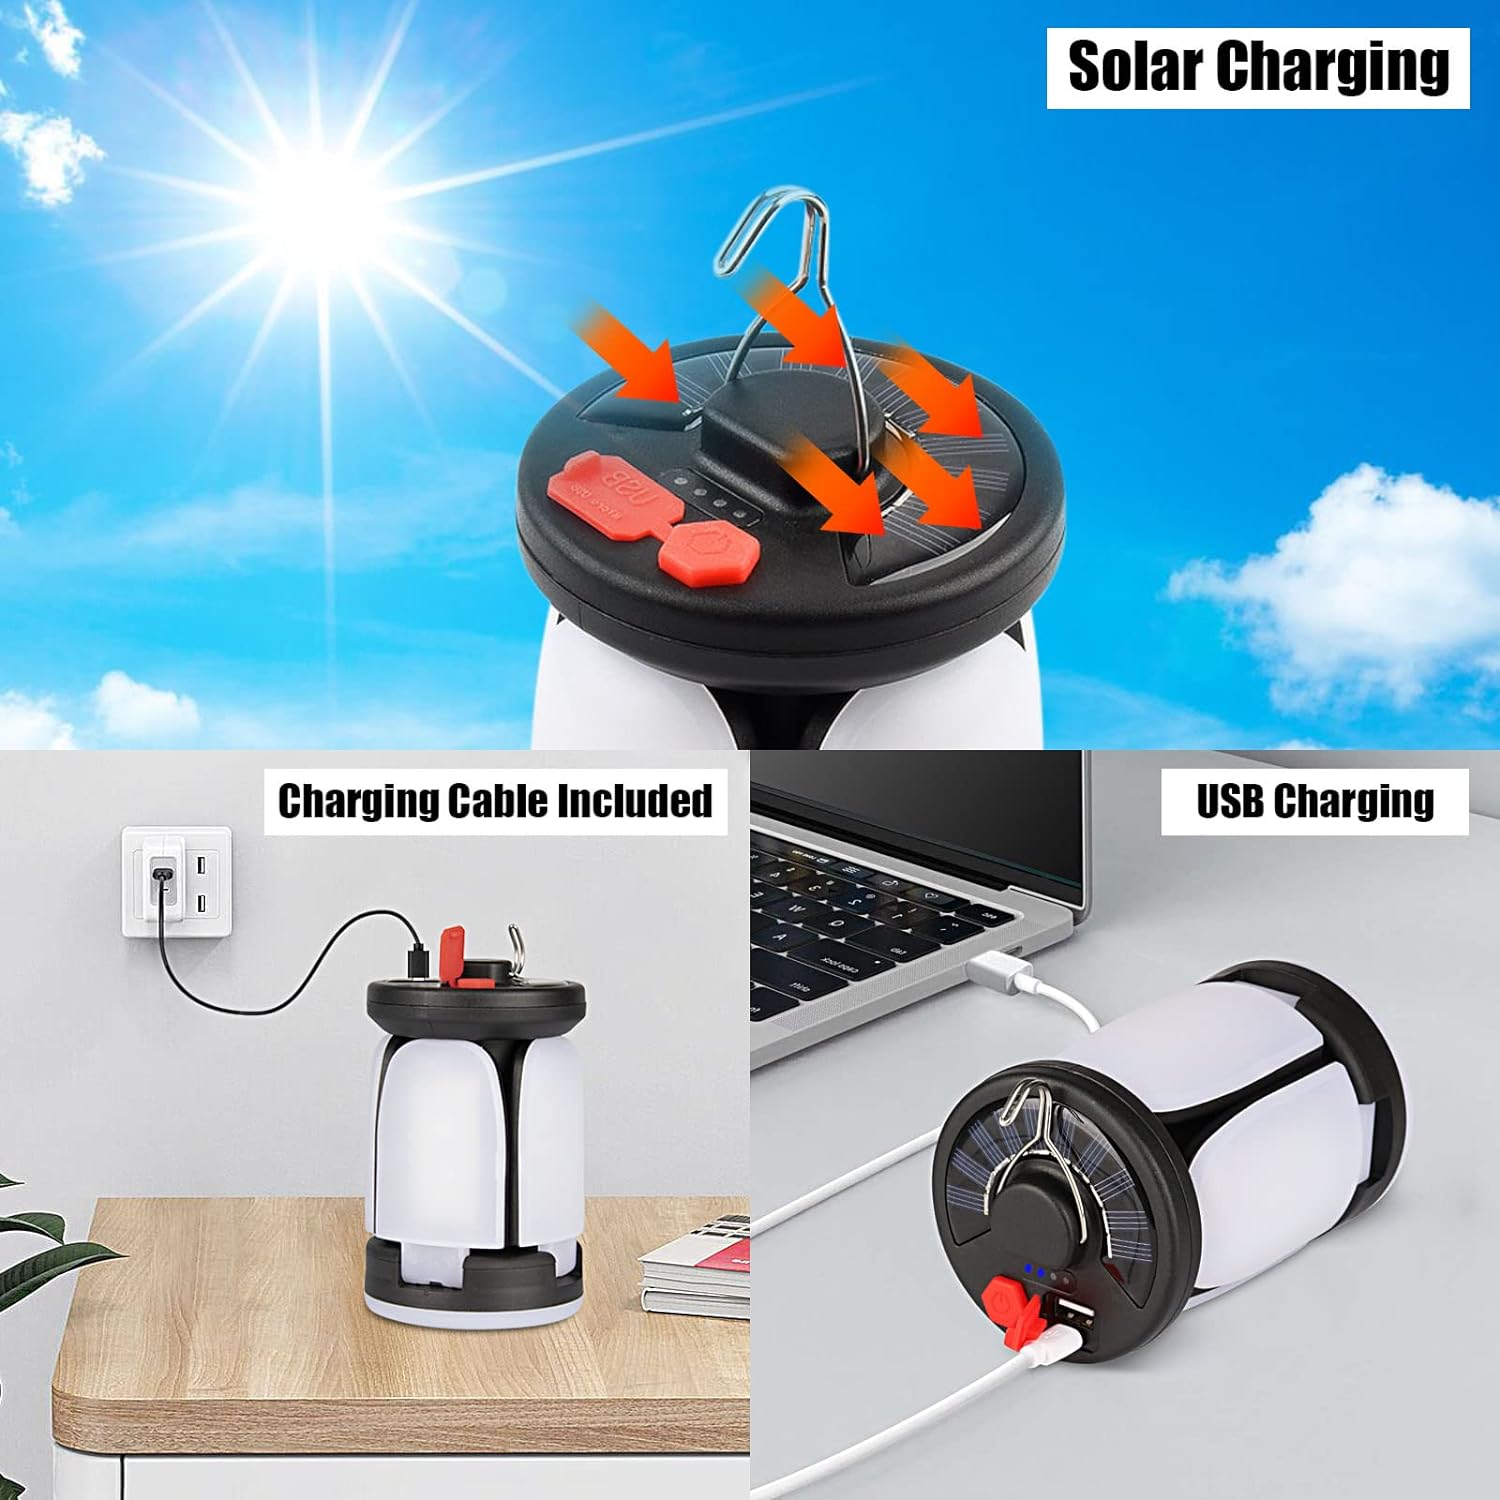 Camping Solar Lamp Rechargeable LED Light With Emergency Power Bank